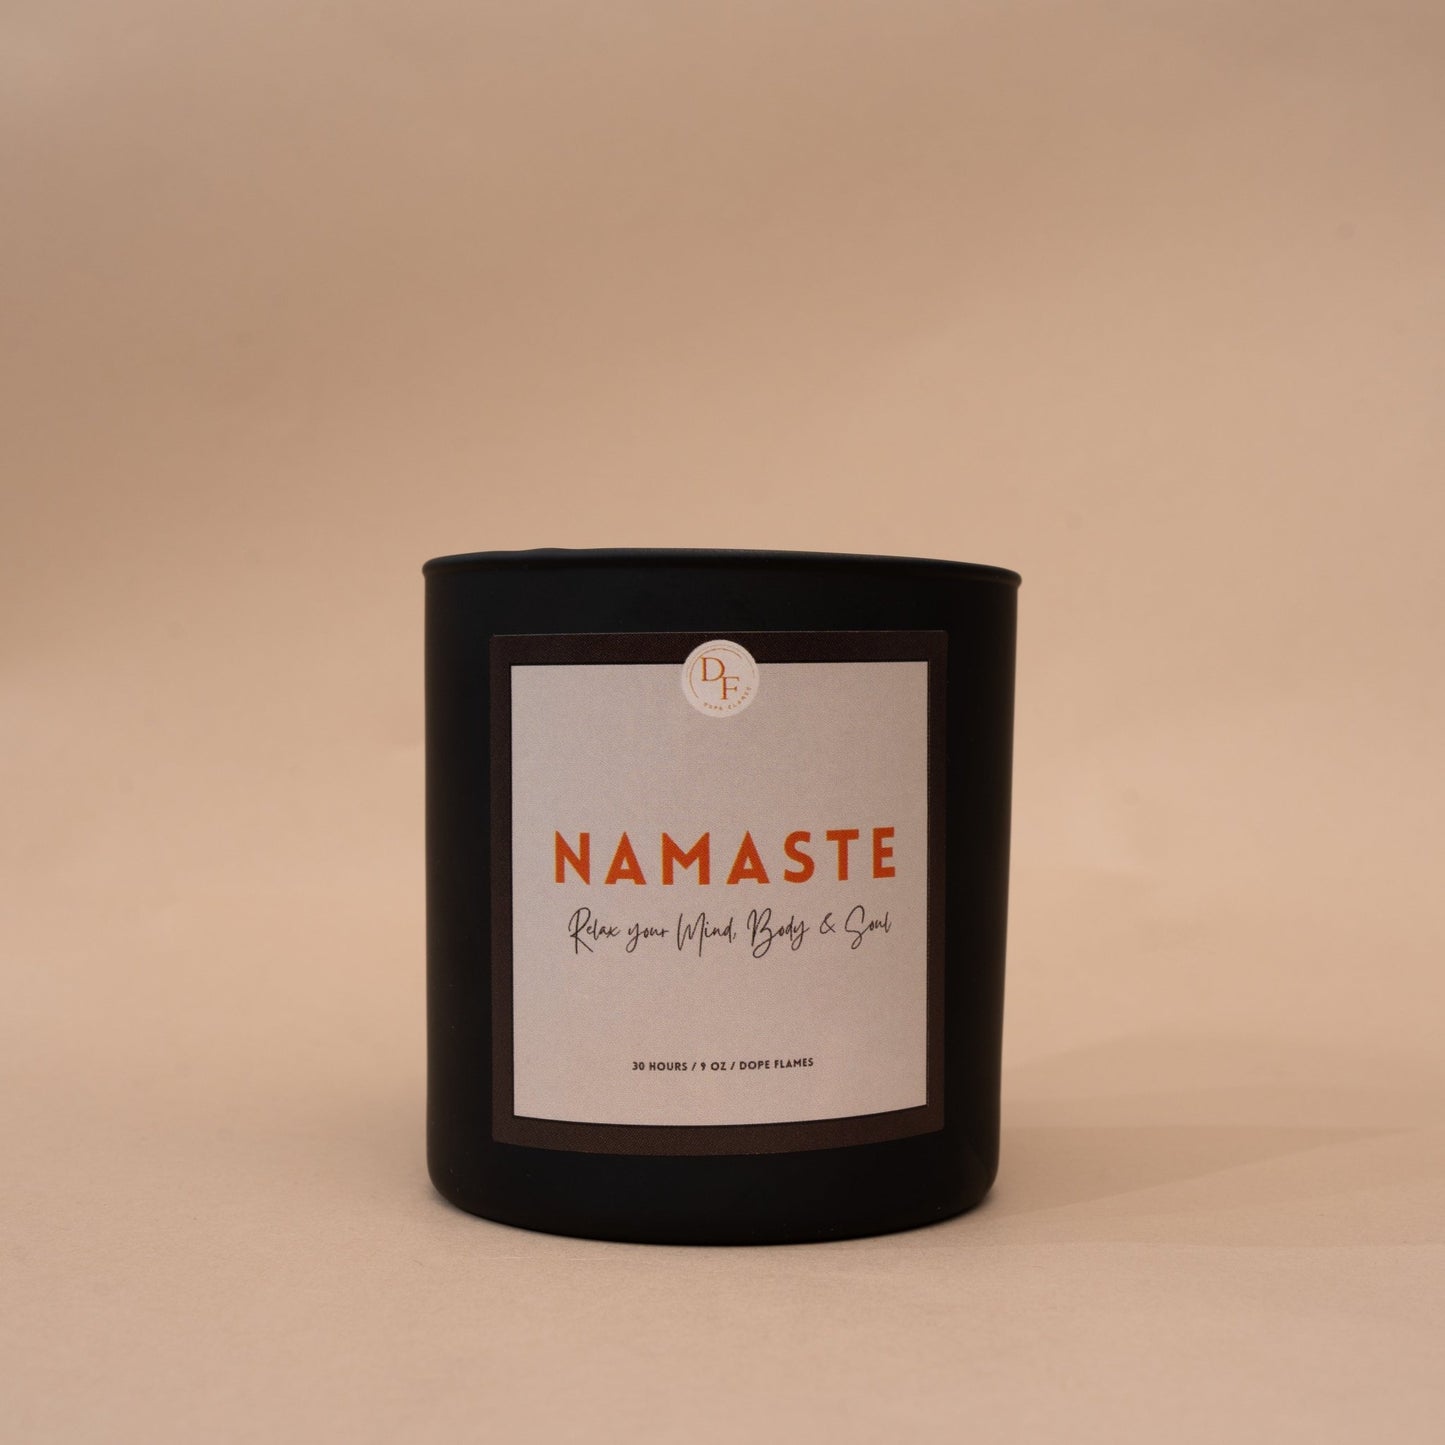 Namaste: Relax your Mind, Body, and Soul